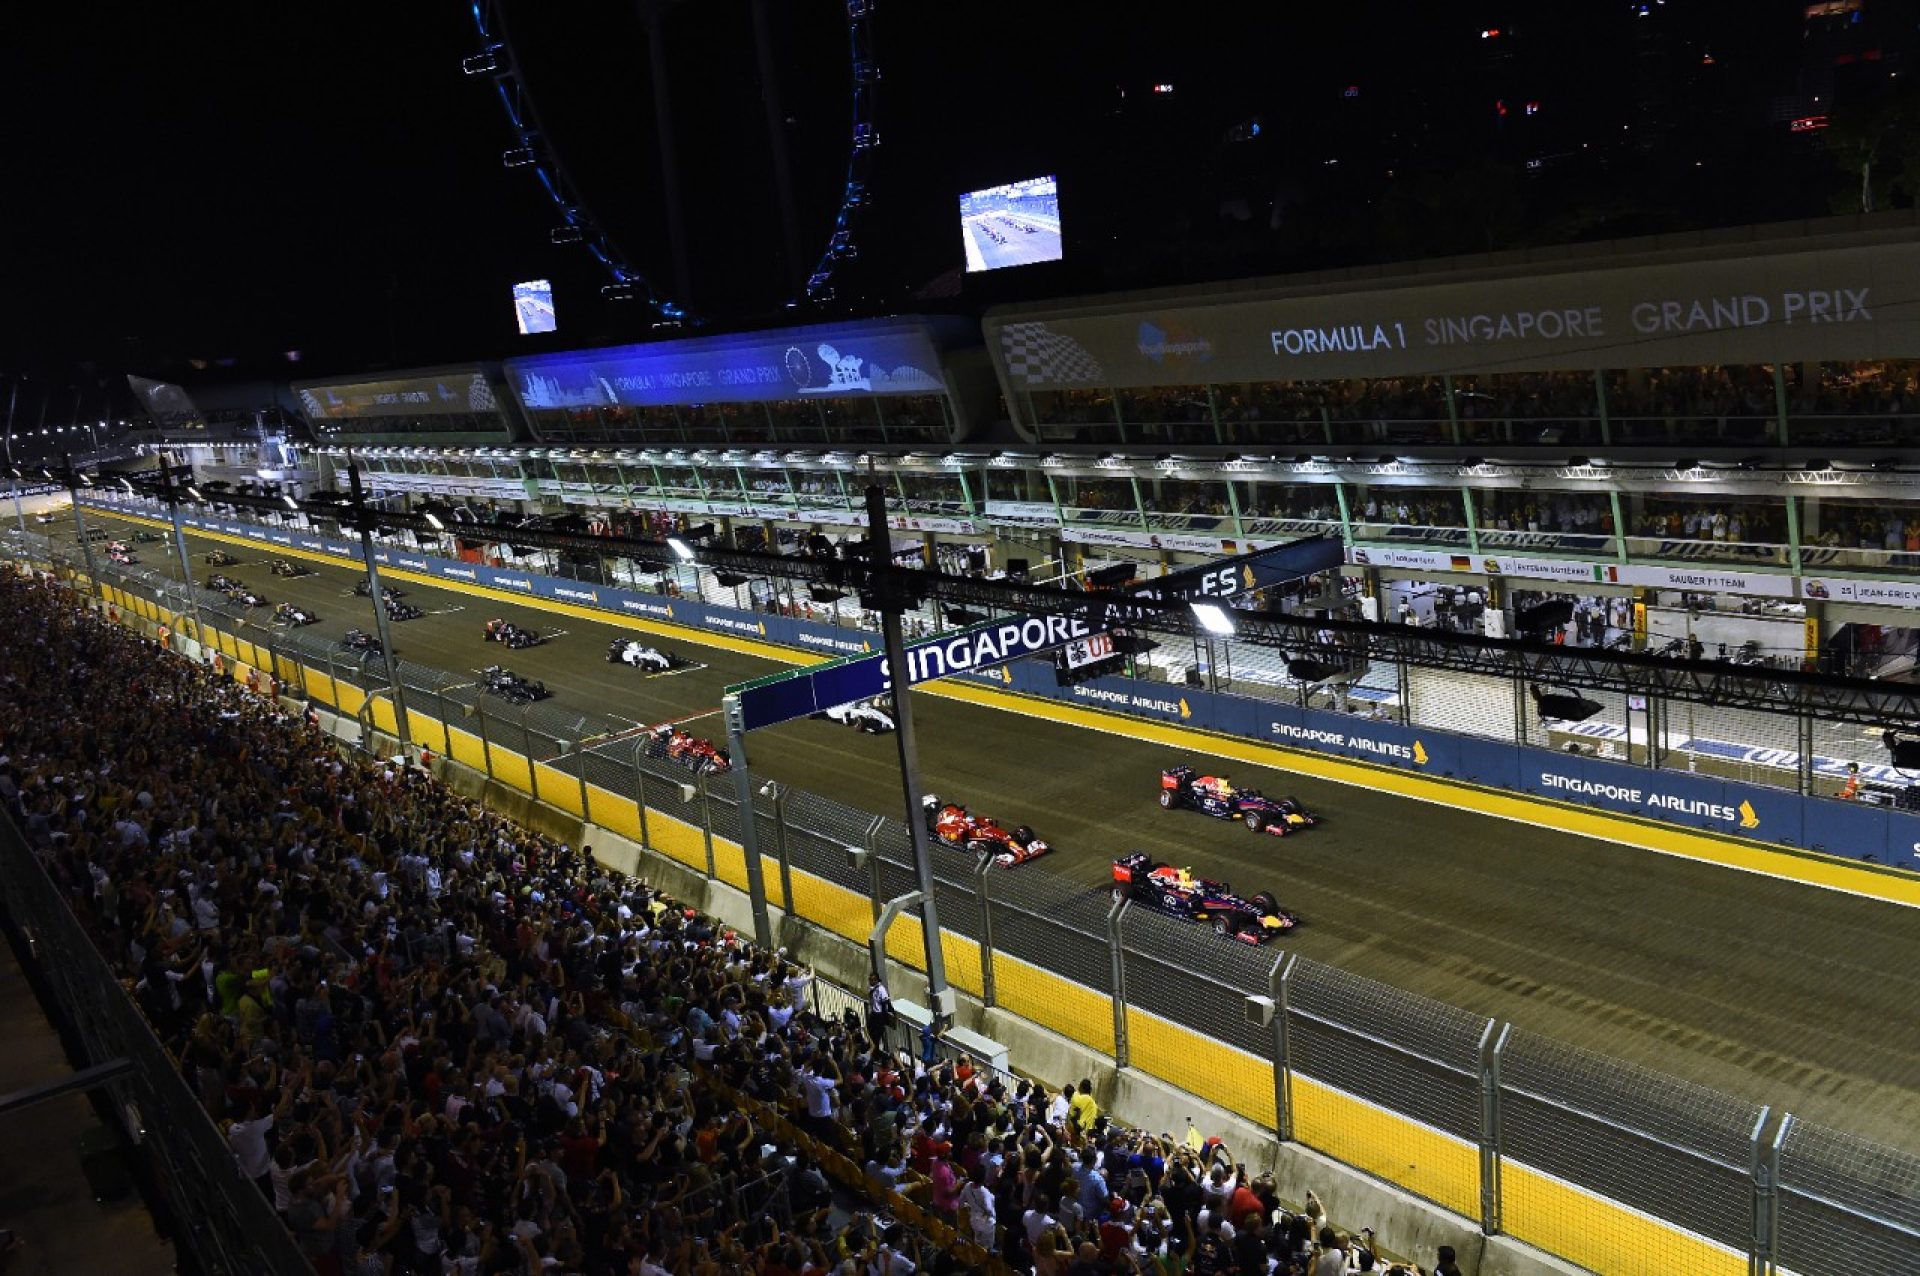 Formula 1-Singapore Grand Prix: 20-22 September tickets price and order